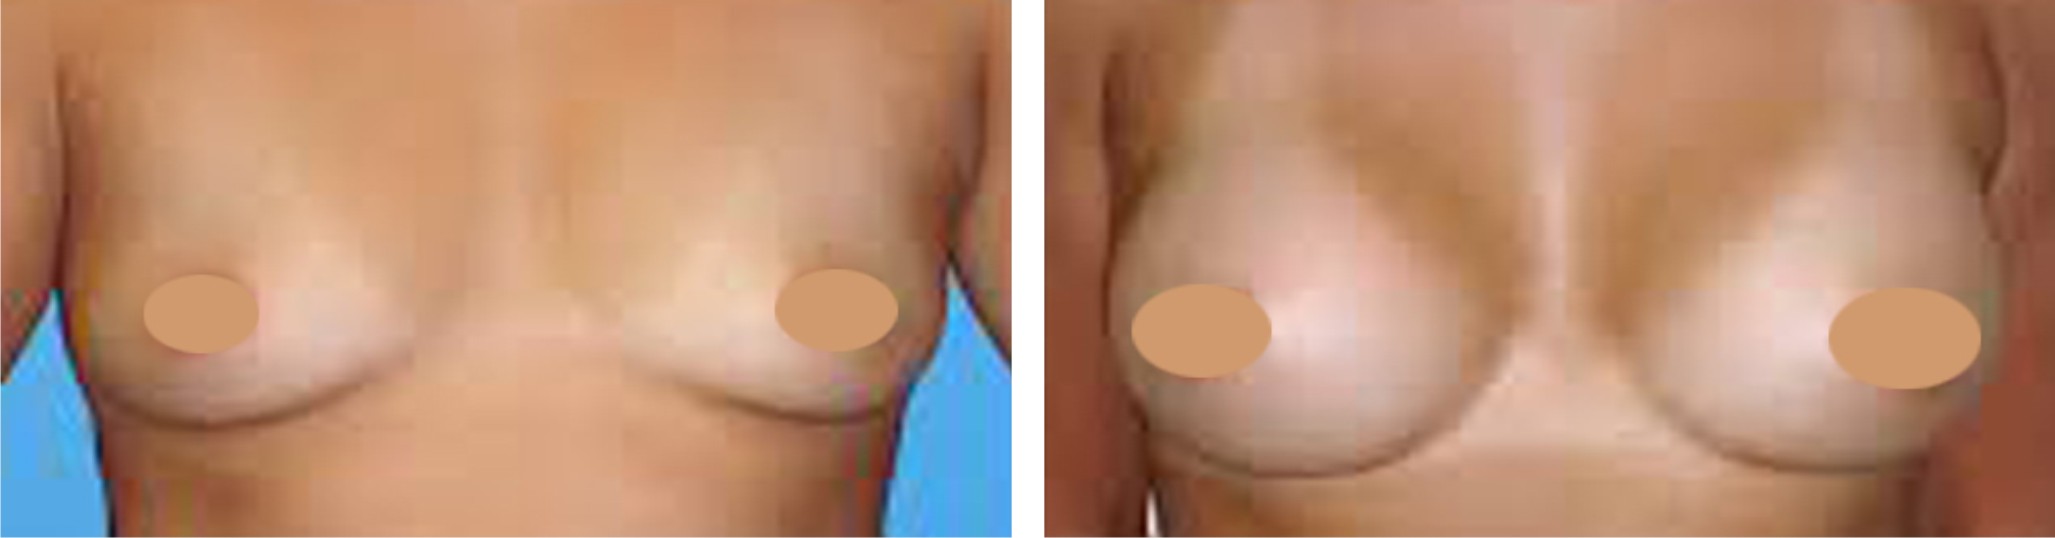 Breast Augmentation Image Two